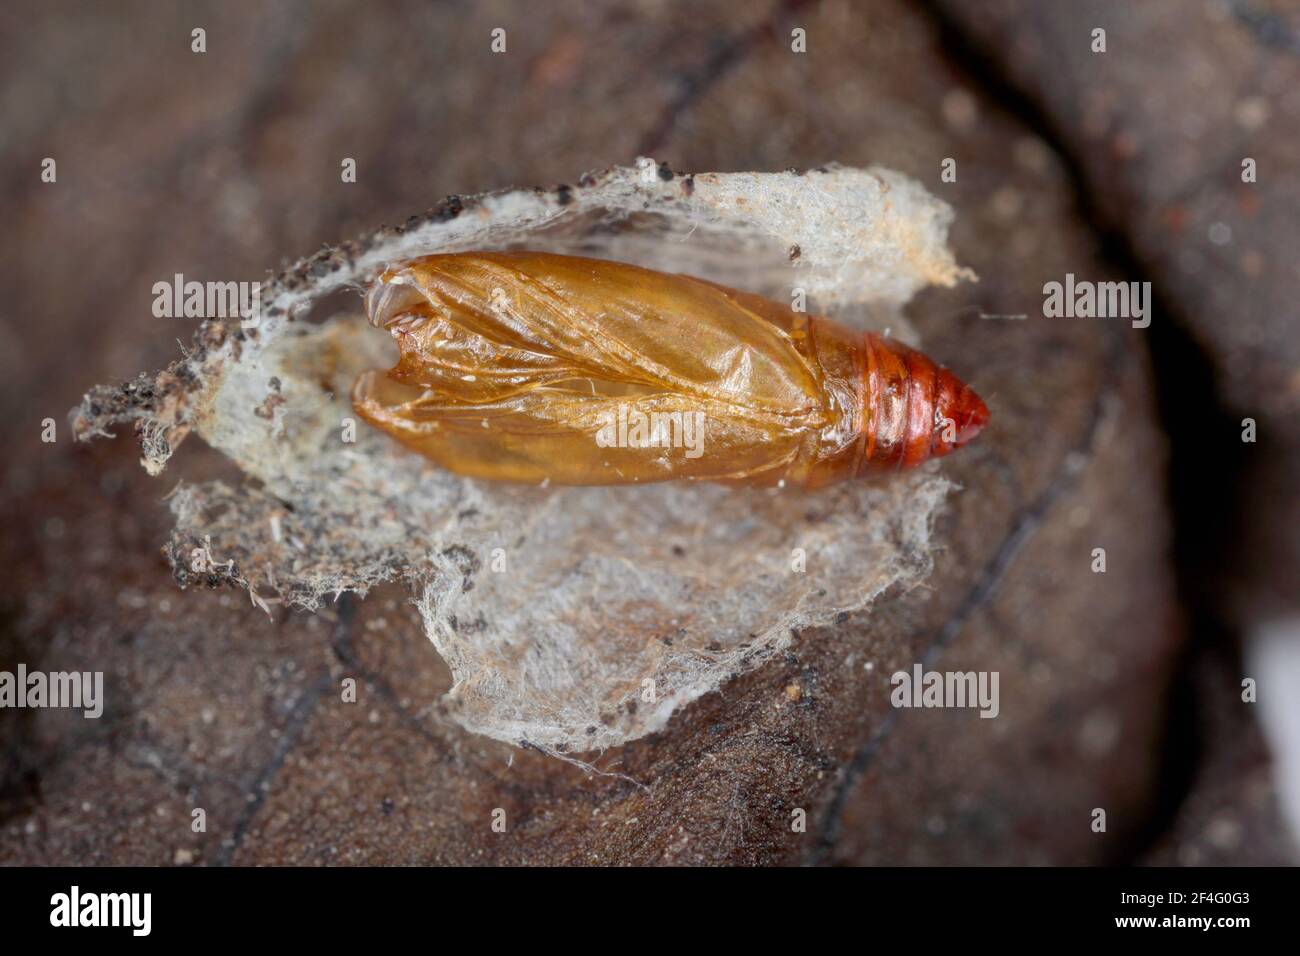 Pupal exam of Scrobipalpa ocellatella. It is a species in the family Gelechiidae. This is an important pest of sugar beet and other crops. Stock Photo